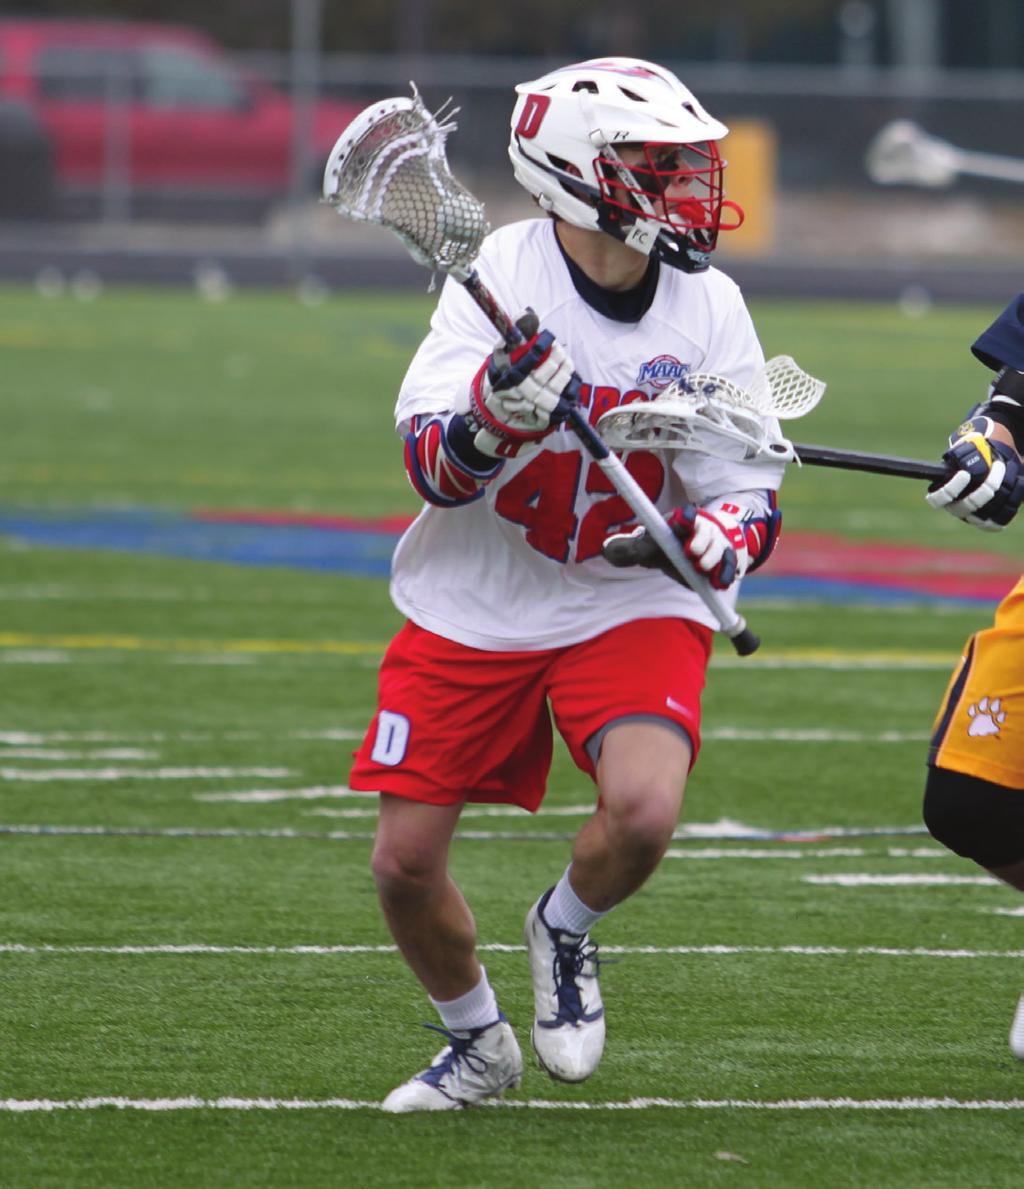 April 30, 2014 - Freshman goalie Jason Weber was named the MAAC s Rookie of the Year and the Defensive Player of the Year and for the third-straight season, the University of Detroit Mercy men s